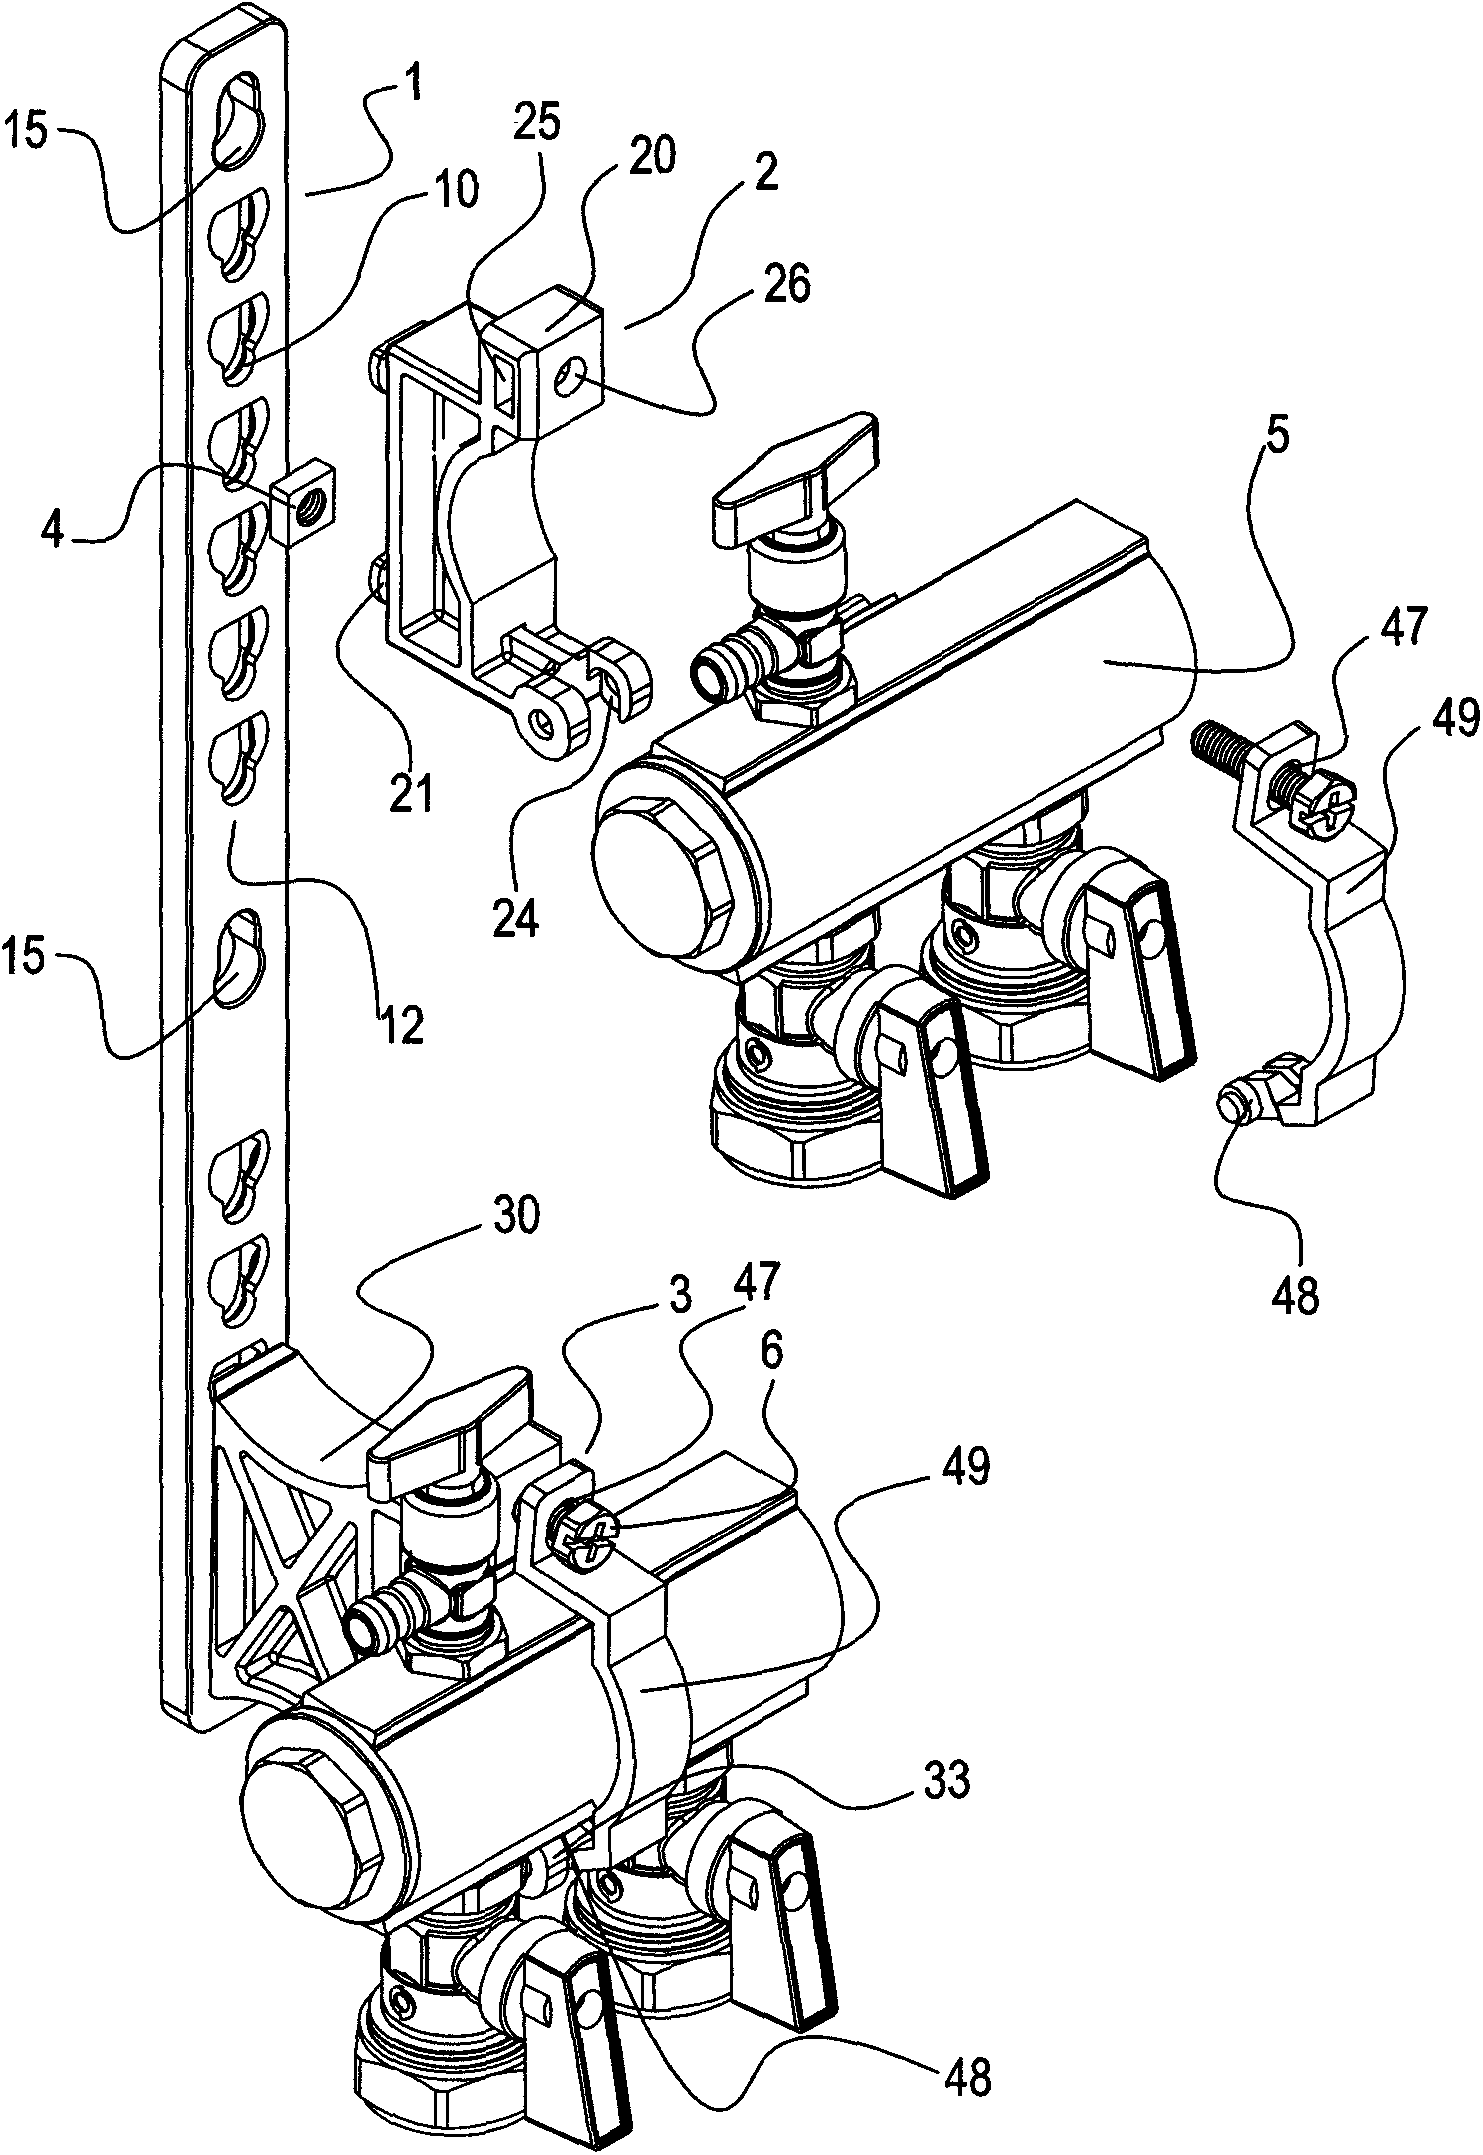 Plastic bracket of water dividing and collecting device